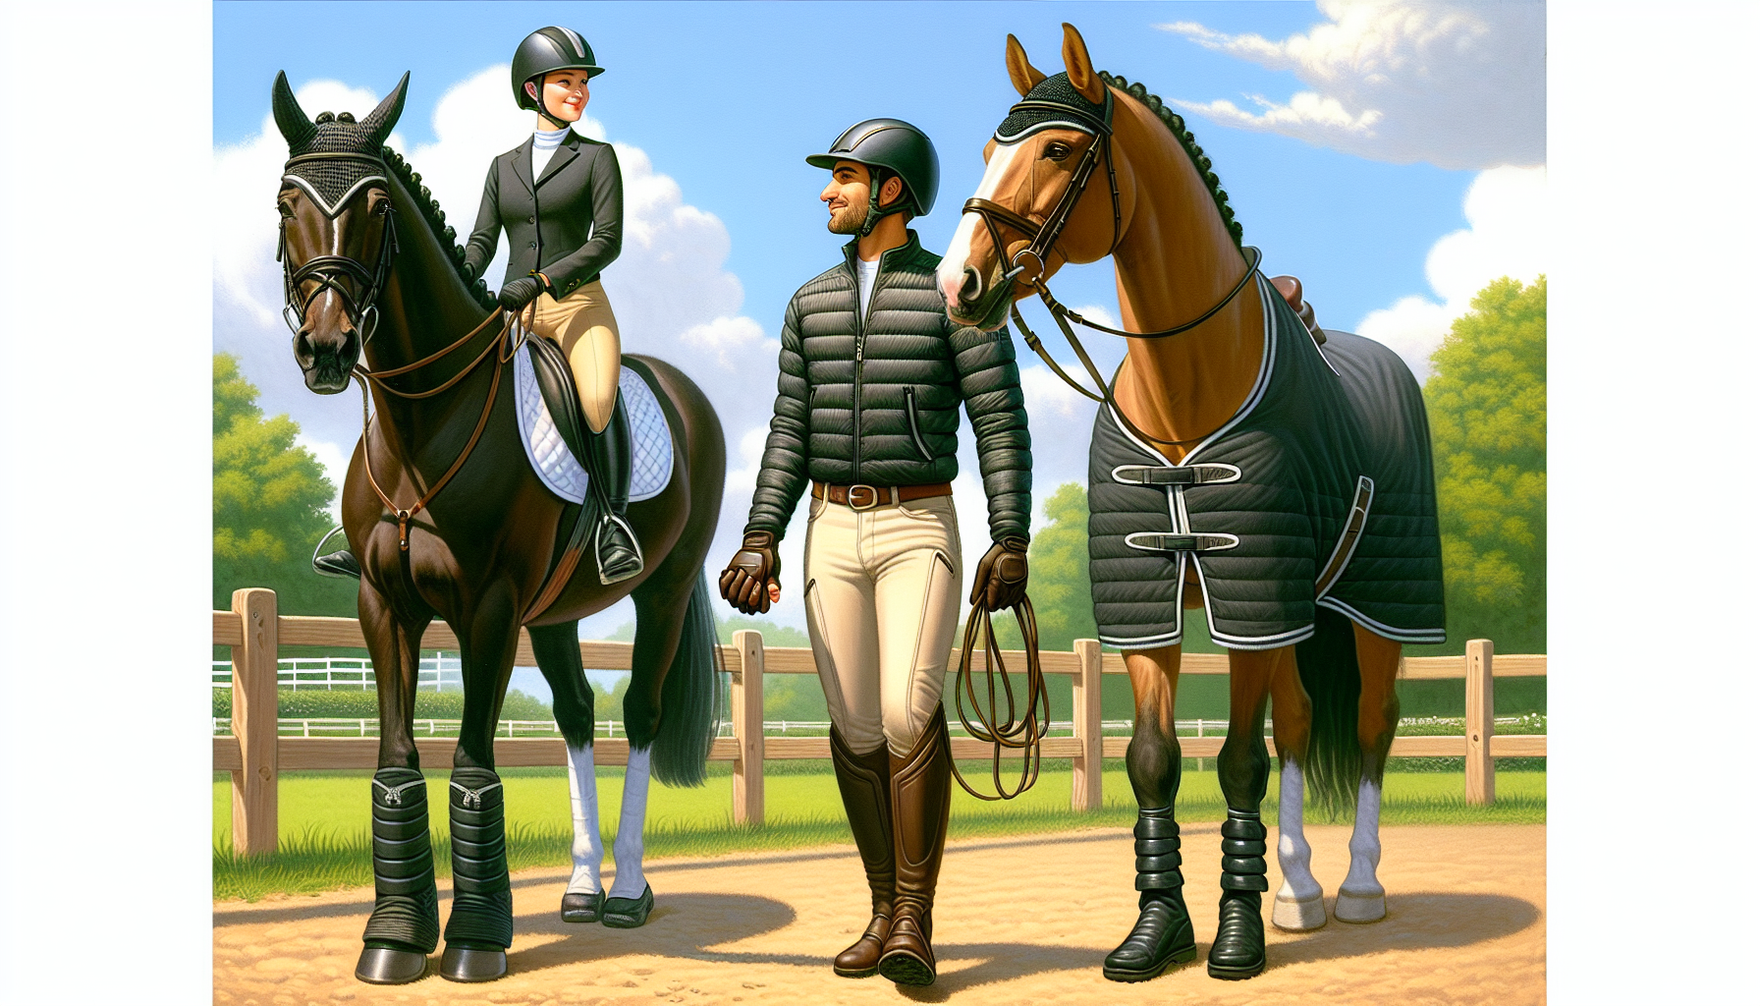 A visual representation that conveys the importance of comfort in equestrian apparel. Picture a scene with two riders, one male and one female. The male rider is of Middle-Eastern descent while the fe